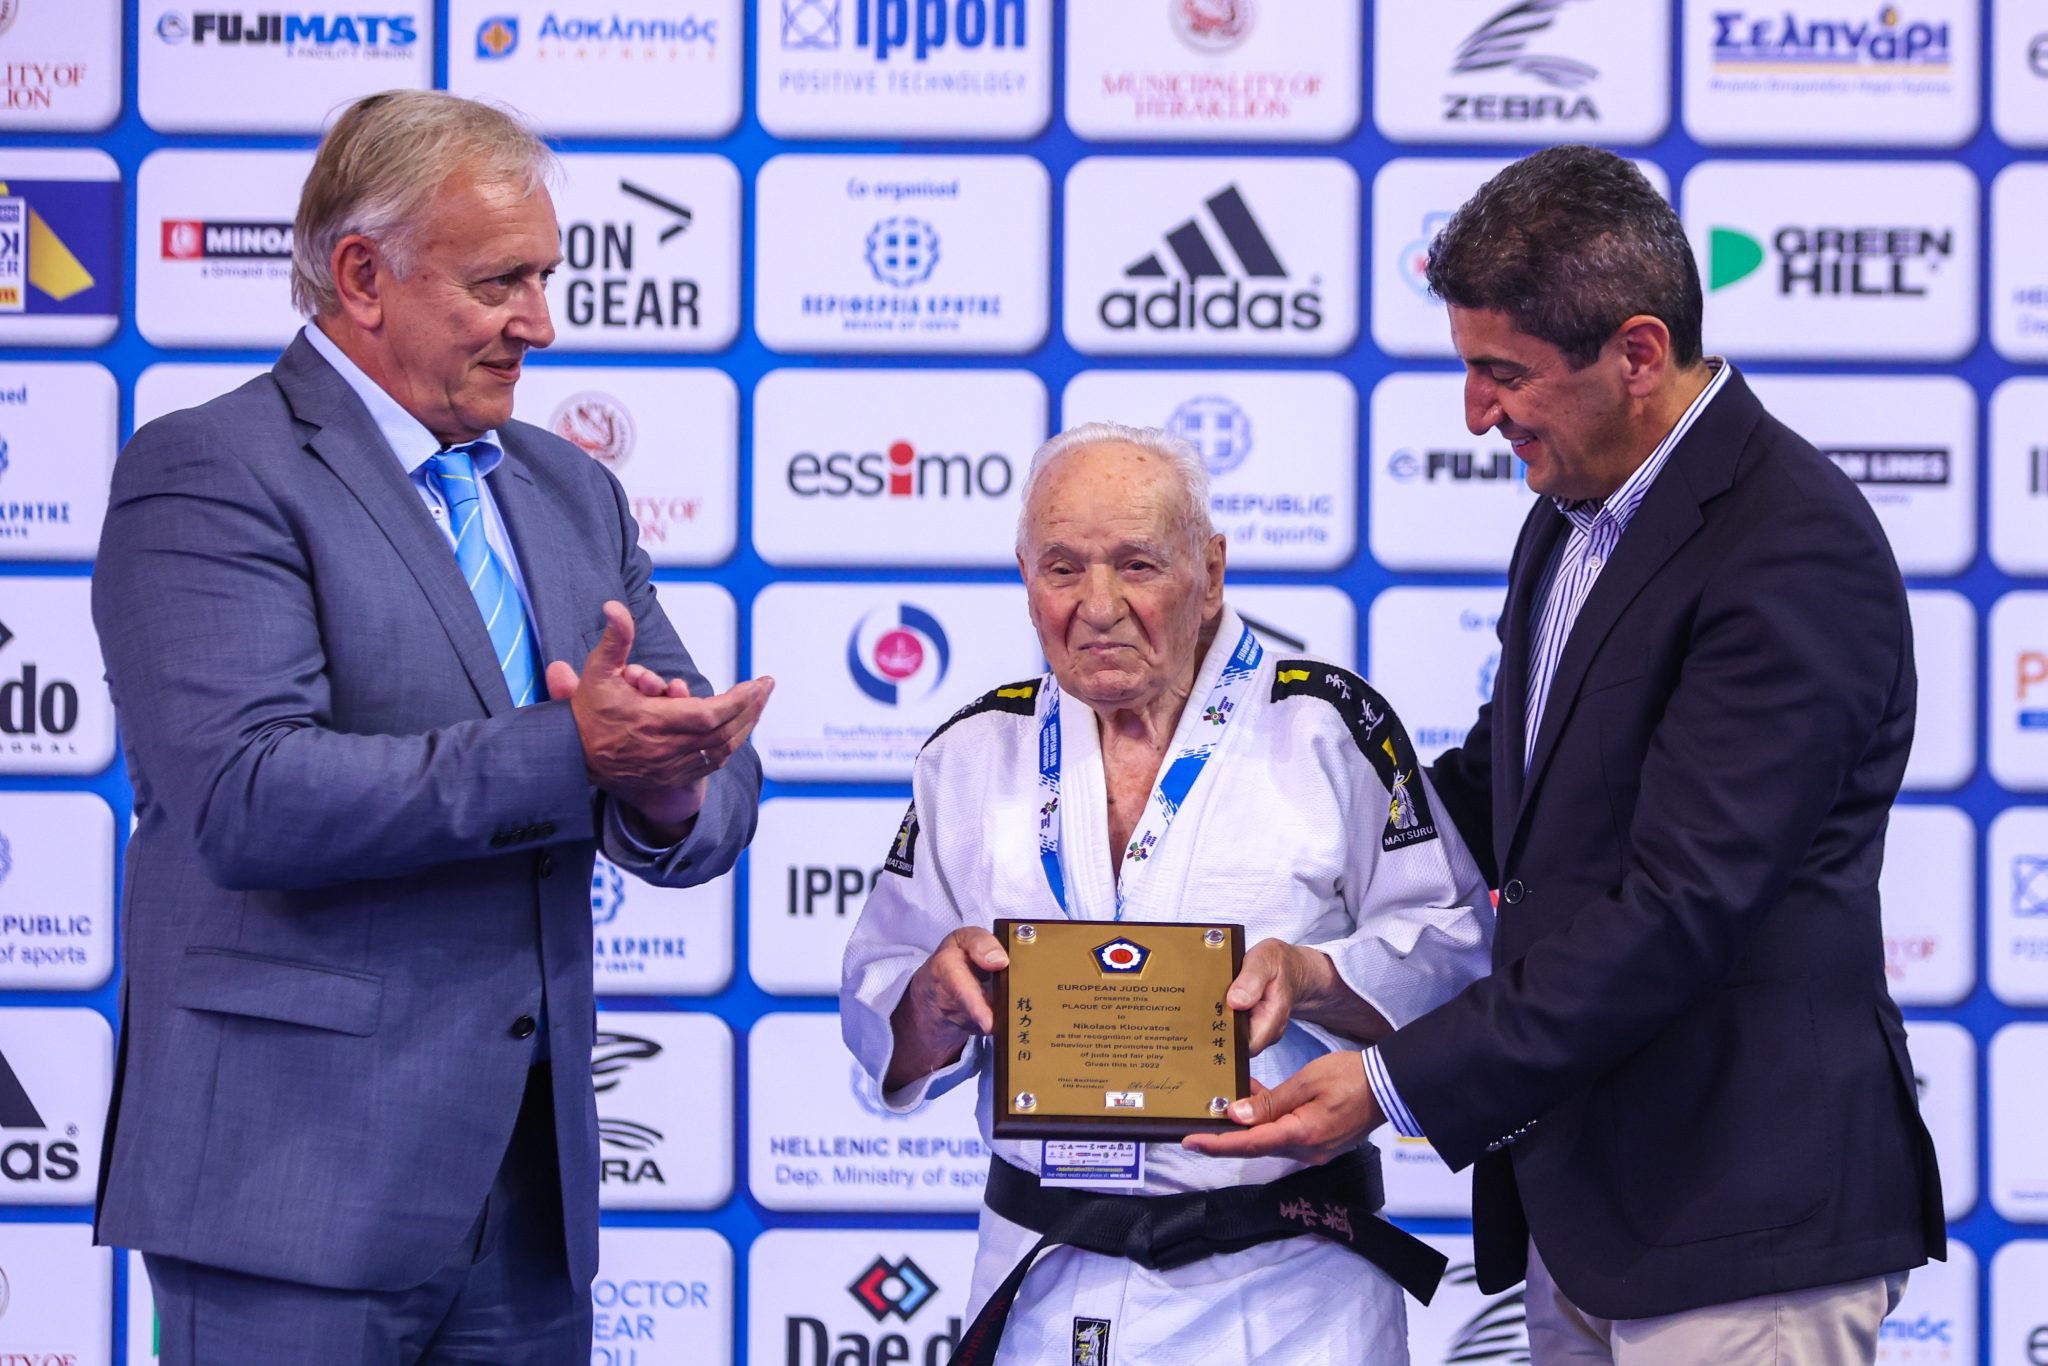 SPECIAL AWARDS DELIVERED BY EJU PRESIDENT AND HEAD REFEREE